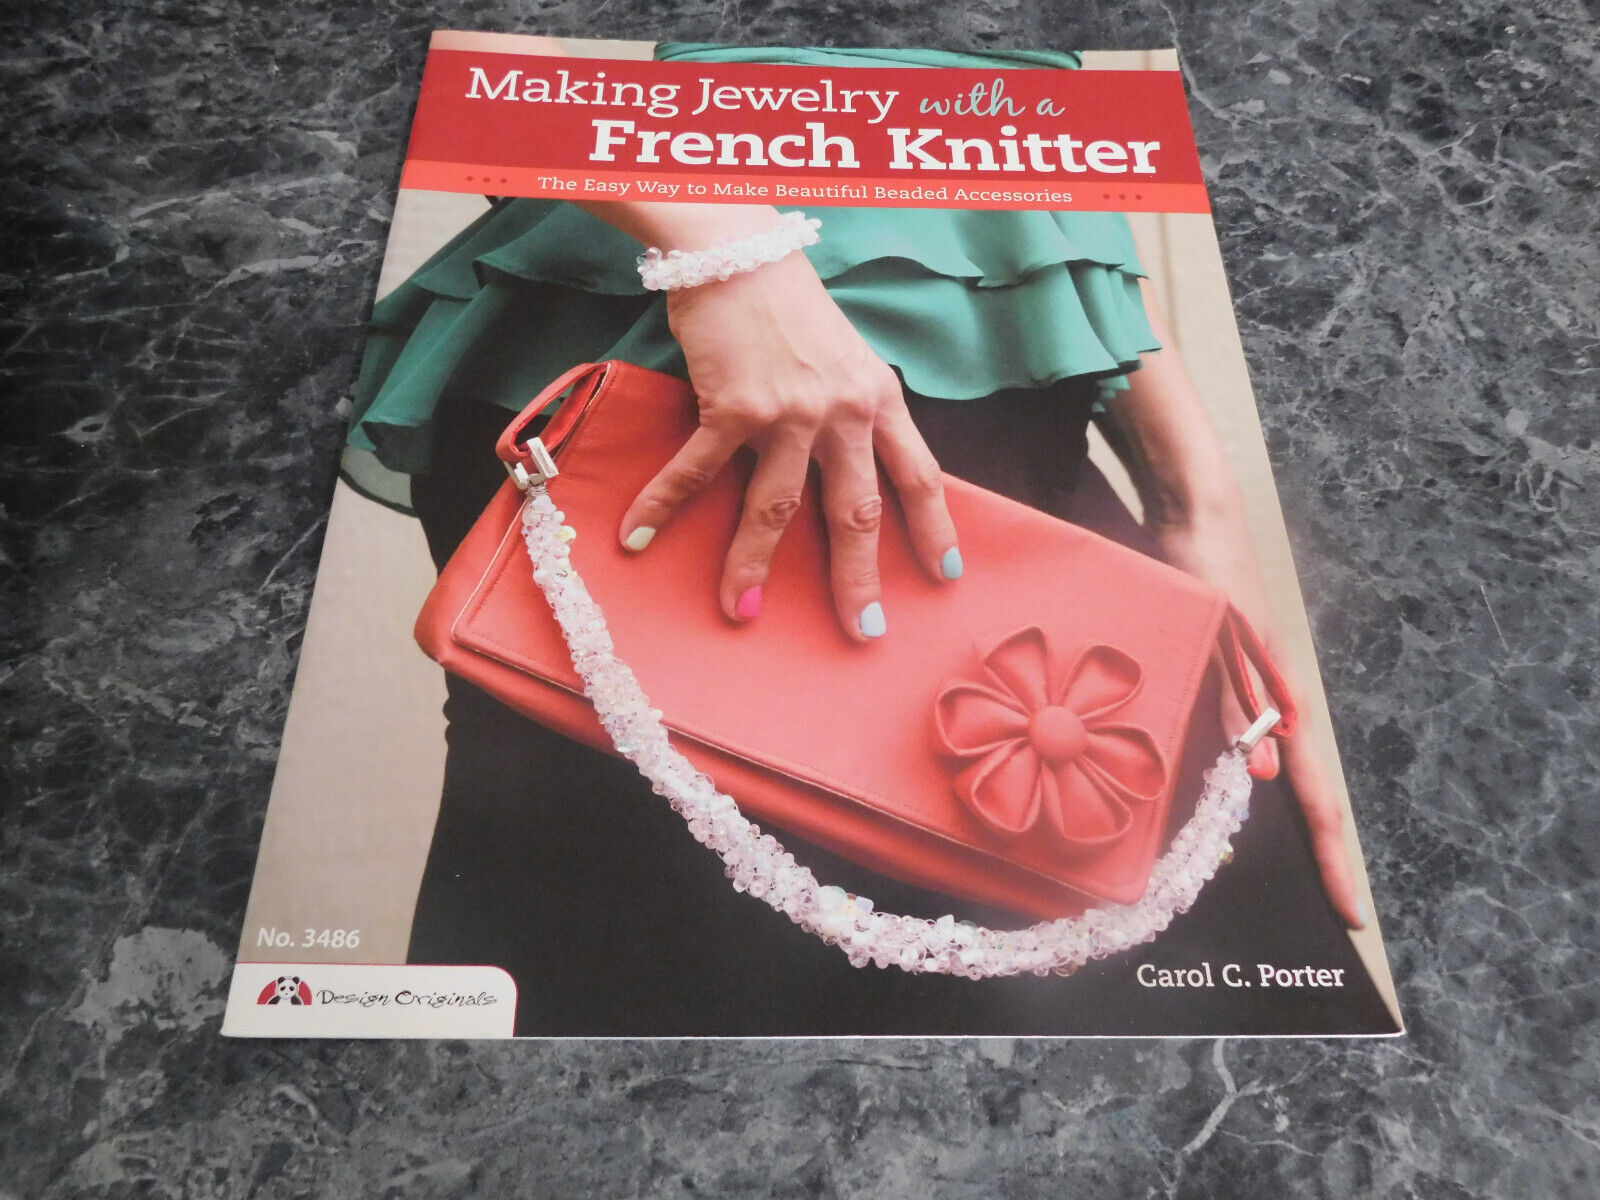 Making Jewelry with a French Knitter by Carol C Porter 3486 - $5.99